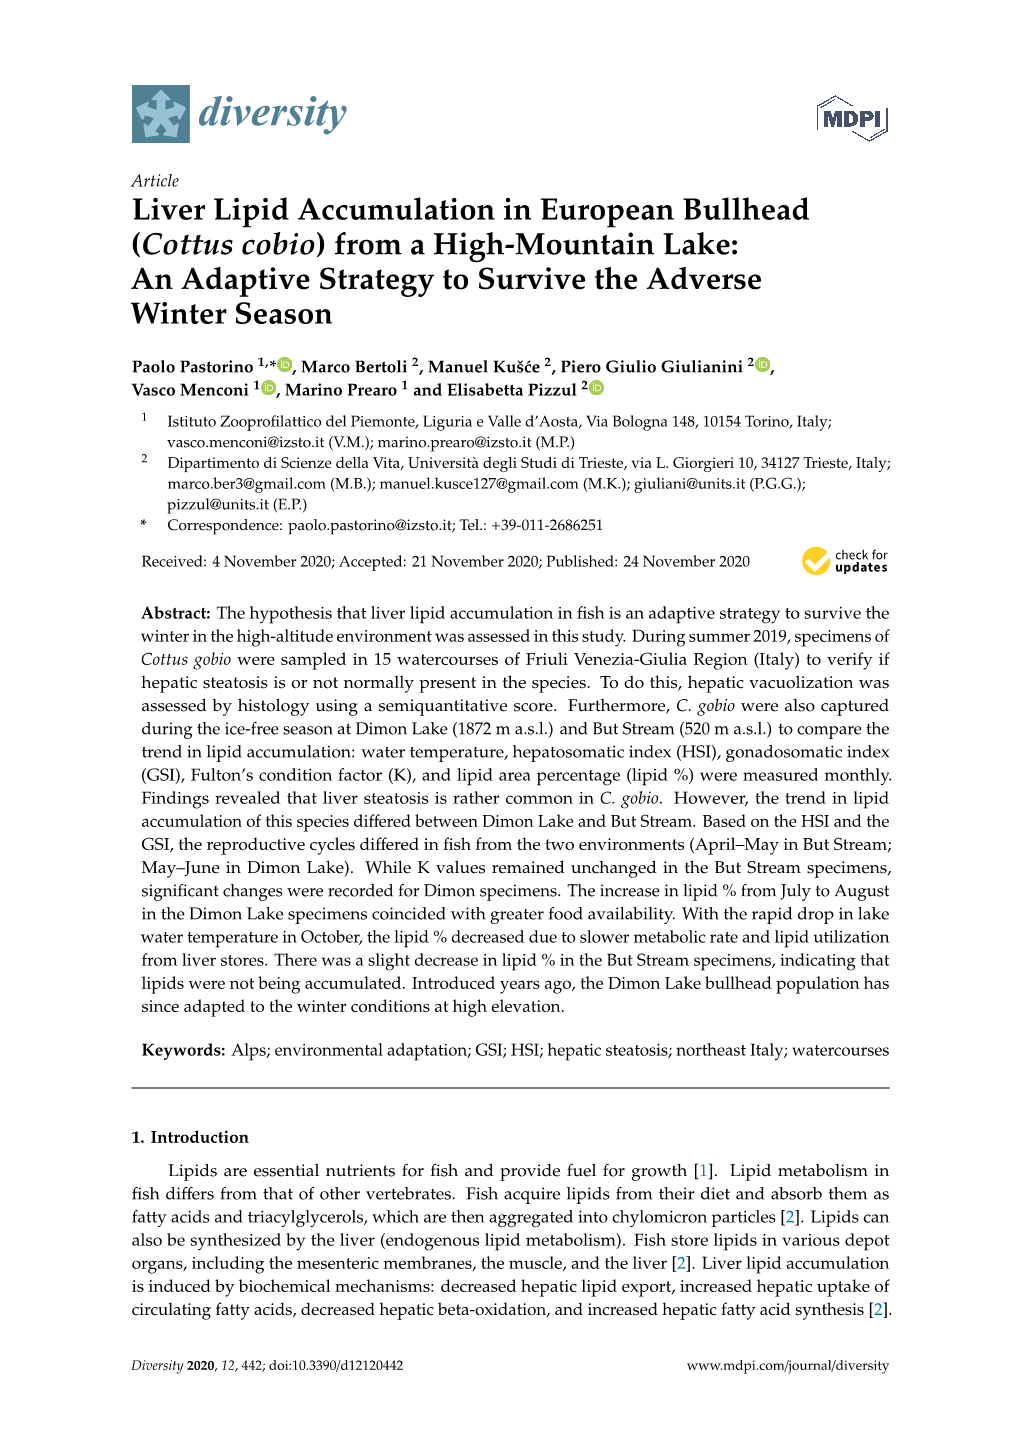 Liver Lipid Accumulation in European Bullhead (Cottus Cobio) from a High-Mountain Lake: an Adaptive Strategy to Survive the Adverse Winter Season